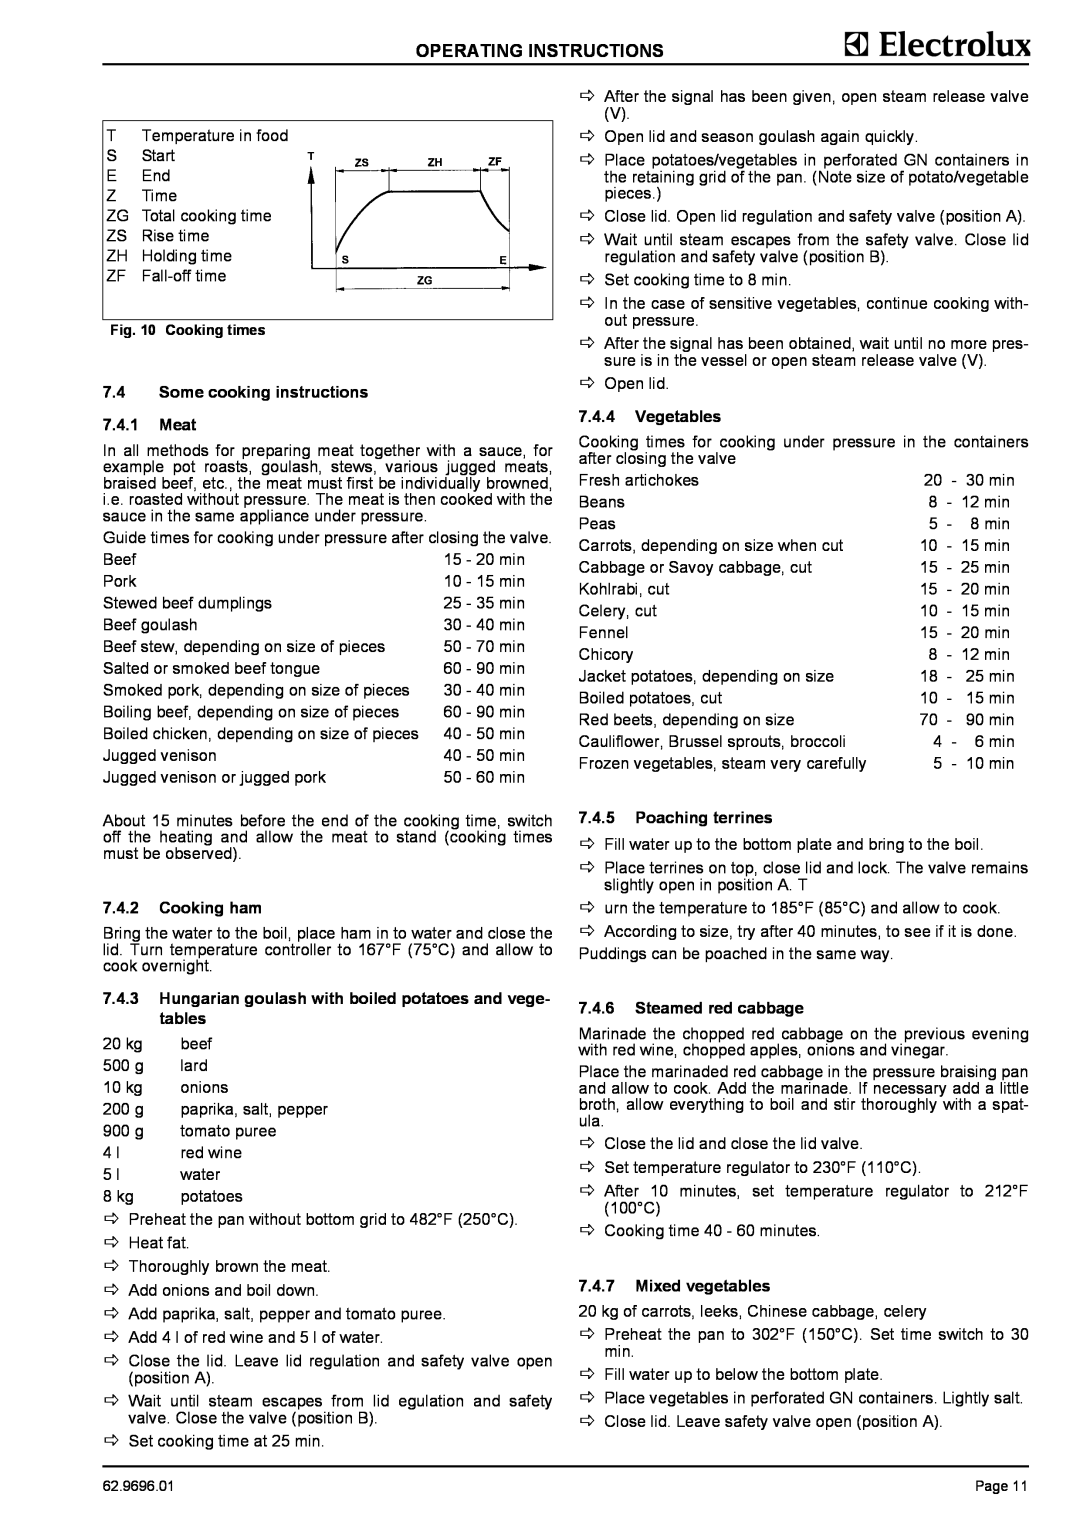 Electrolux 9CHG583309 Operating Instructions, Some cooking instructions 7.4.1 Meat, Cooking ham, Vegetables, Cooking times 